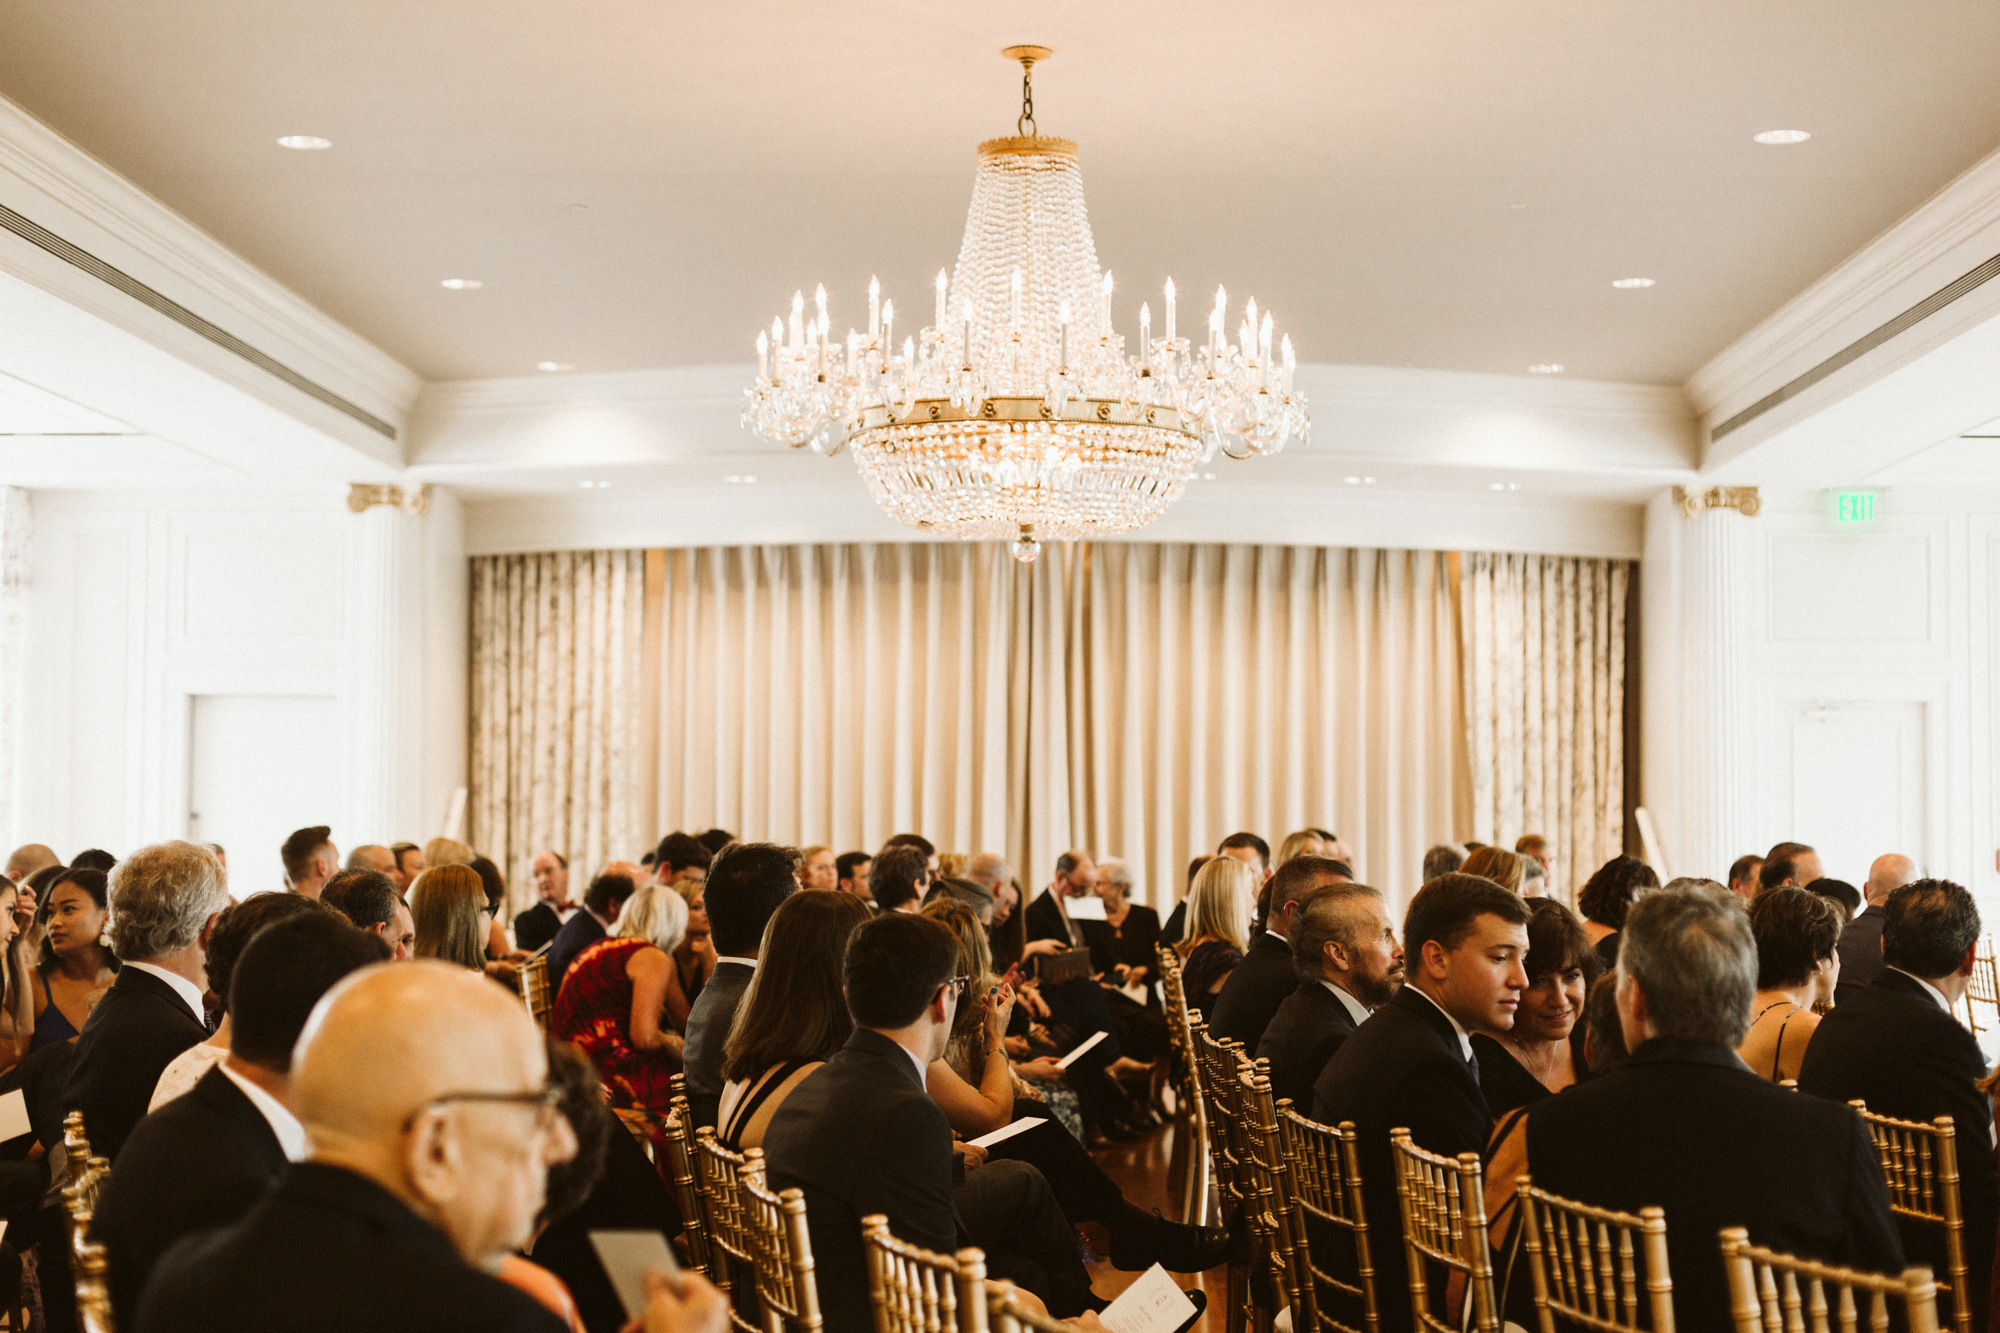 Elegant, Columbia Country Club, Chevy Chase Maryland, Baltimore Wedding Photographer, Classic, Traditional, Jewish Wedding, Crystal Chandelier, Guests awaiting Ceremony, Gold Ceremony Chairs